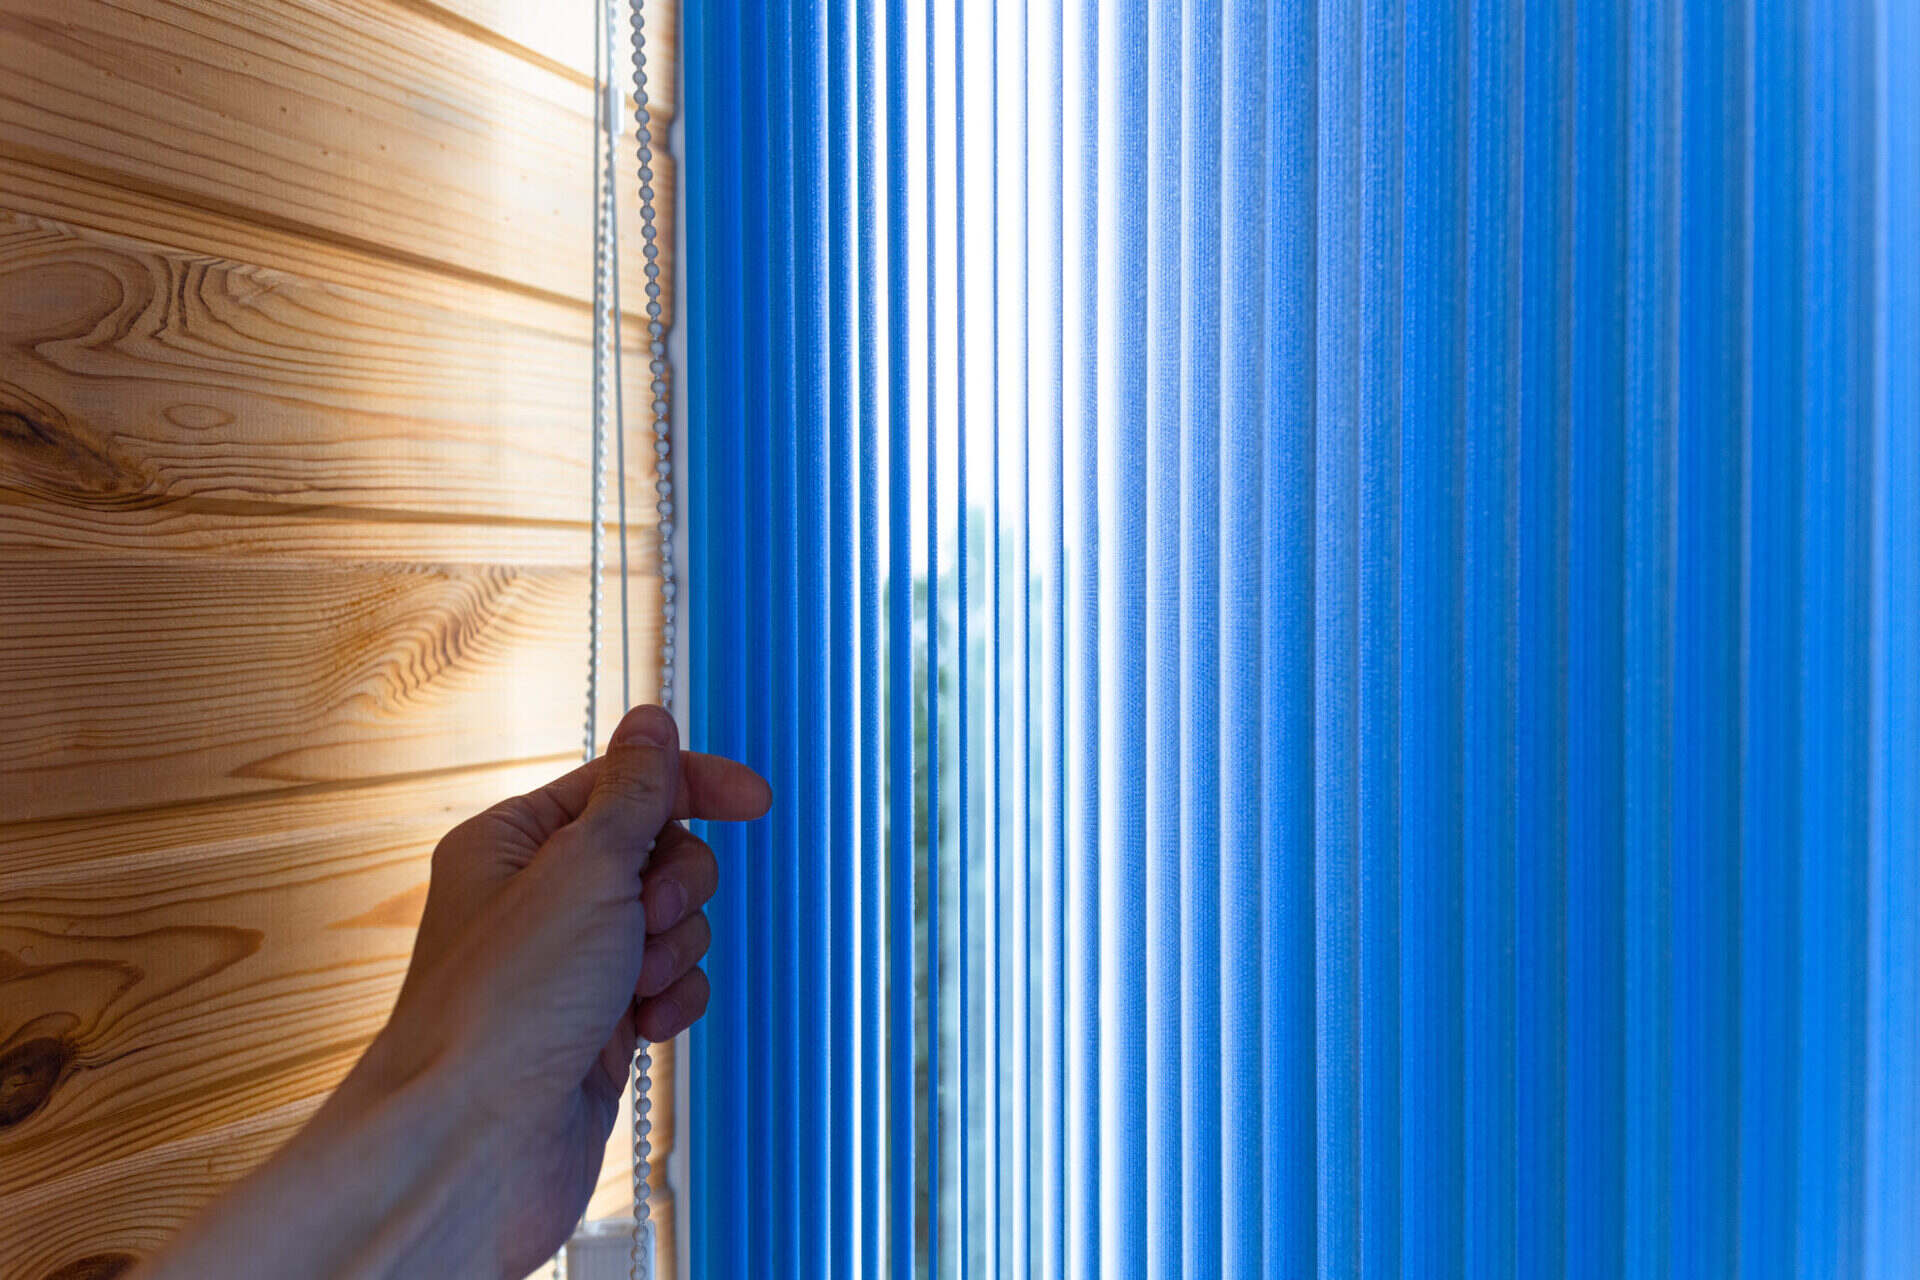 How To Make Your Own Blinds